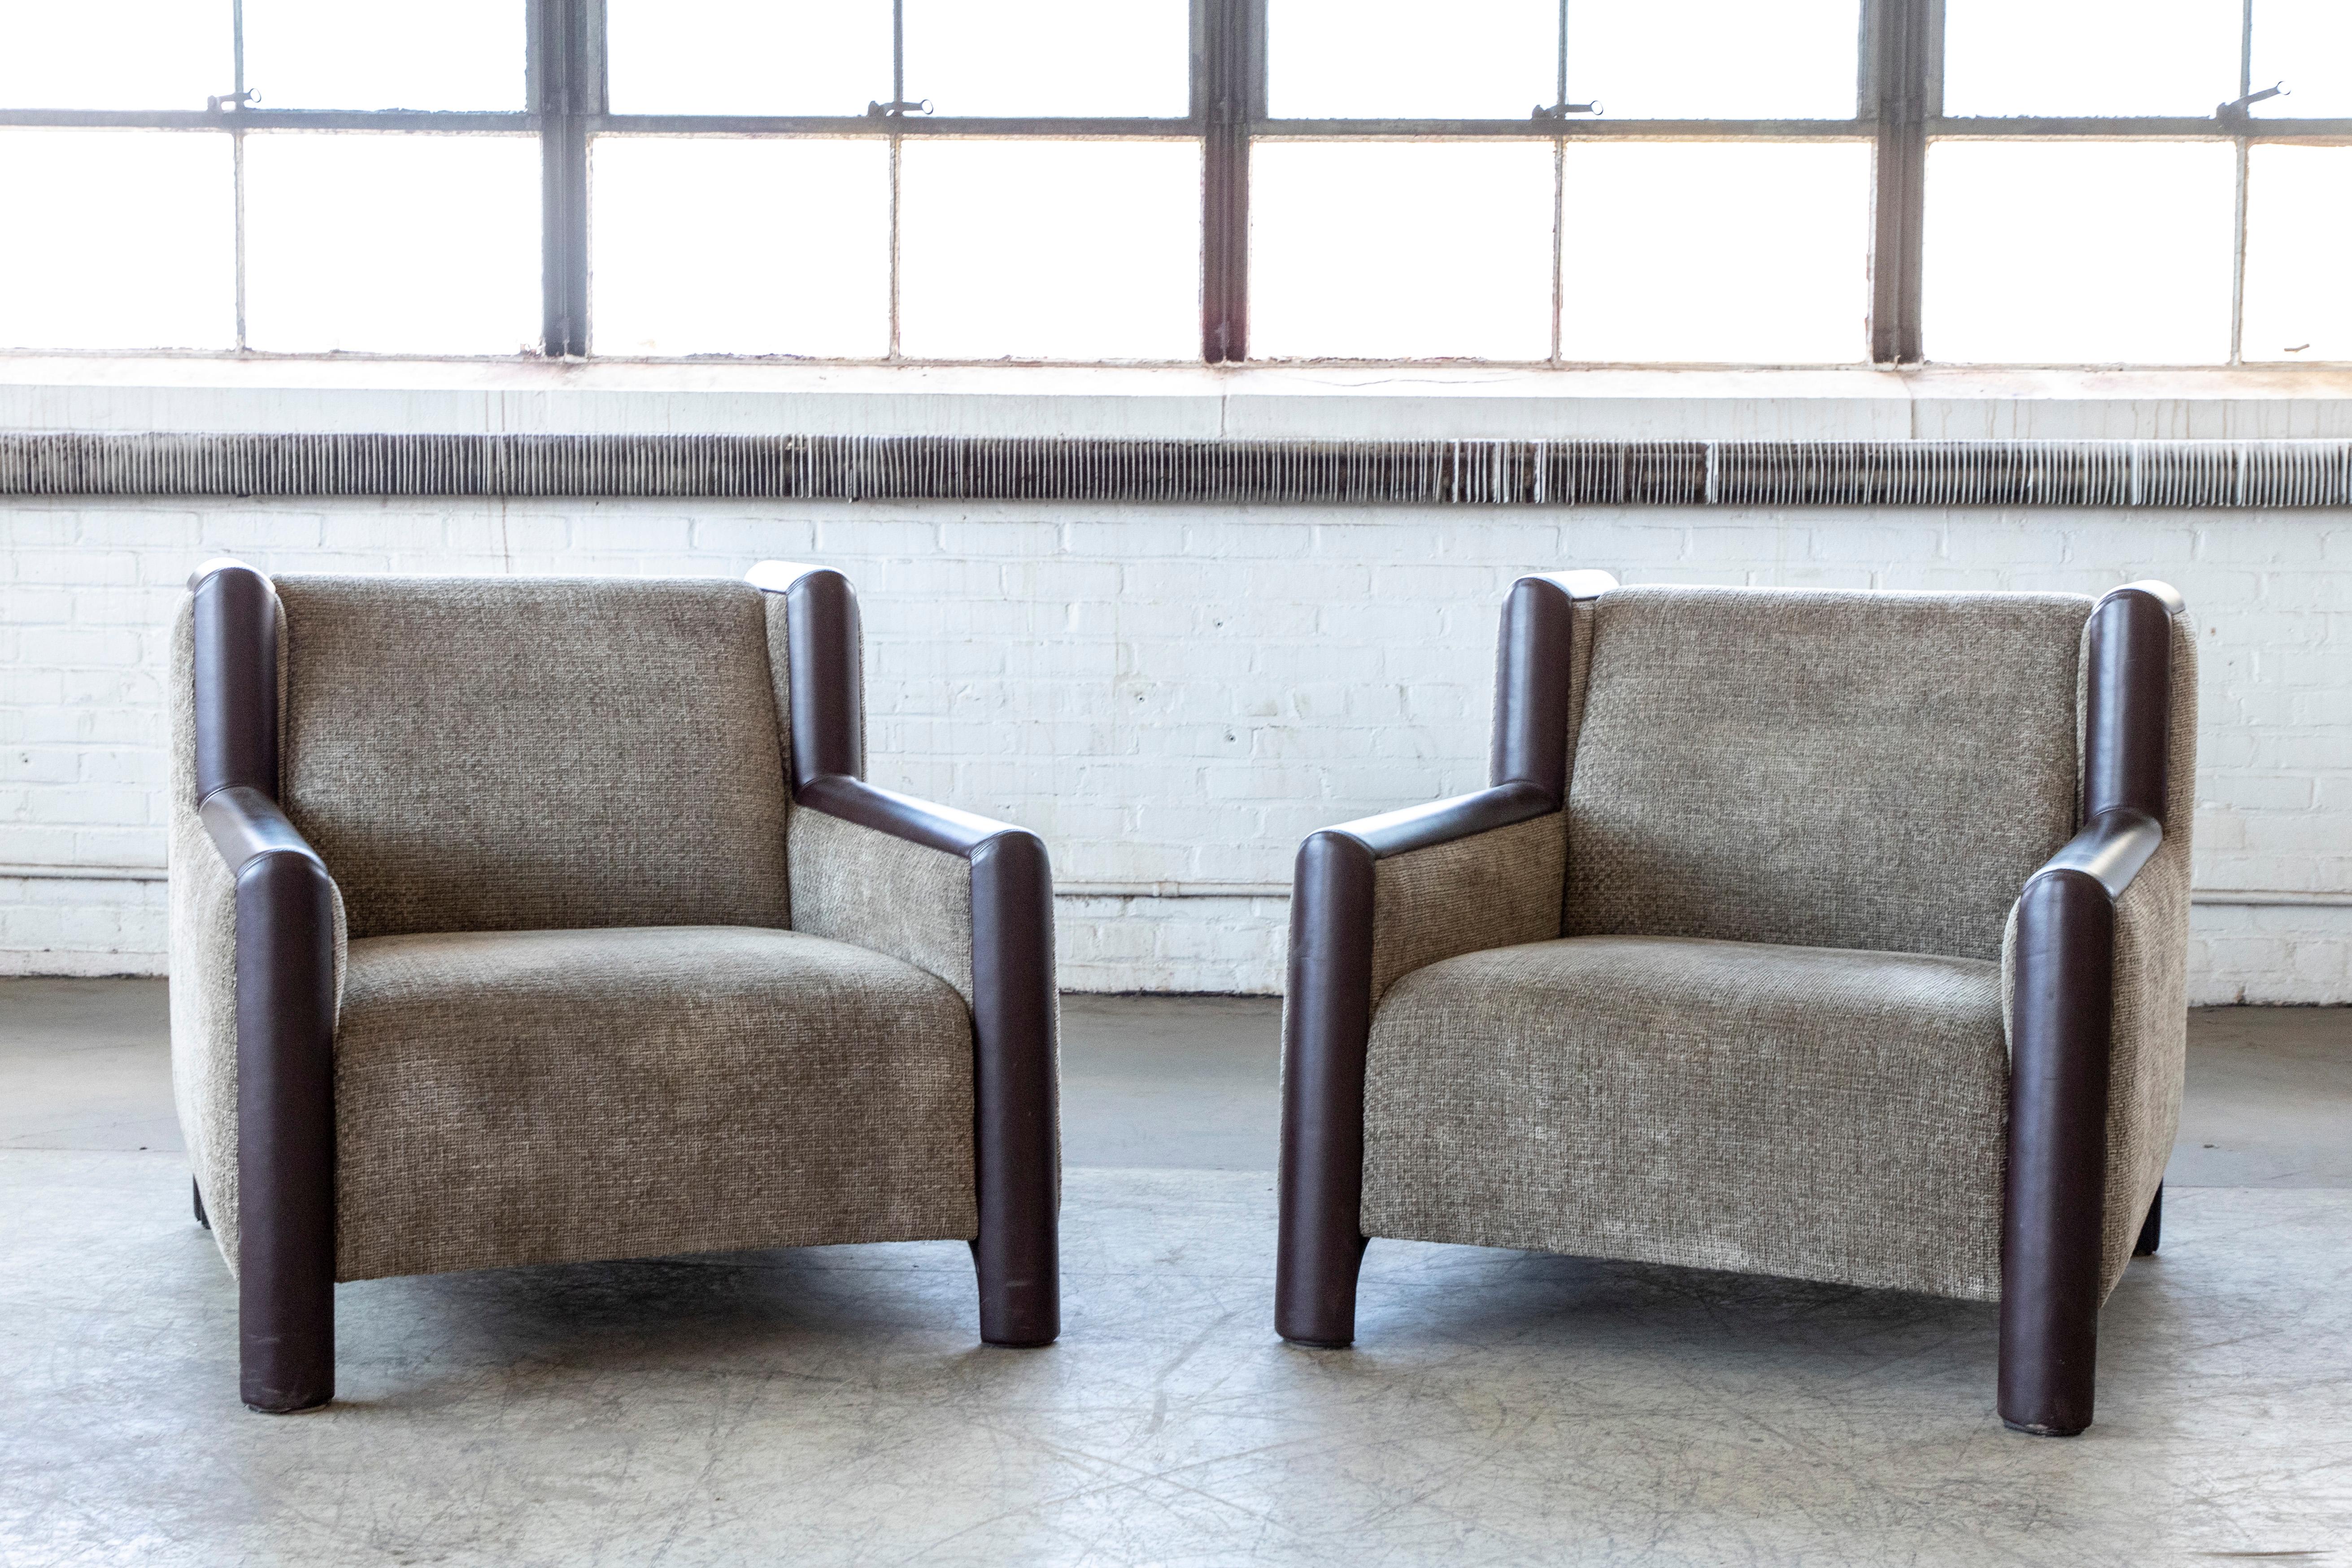 A pair of vintage contemporary 'Ginevra' lounge chairs by Romeo Sozzi for Promemoria Furniture. Very plush and very comfortable. Solid and sturdy handmade in Italy and upholstered in a tweed-like wool and with chocolate colored leather on the edges.